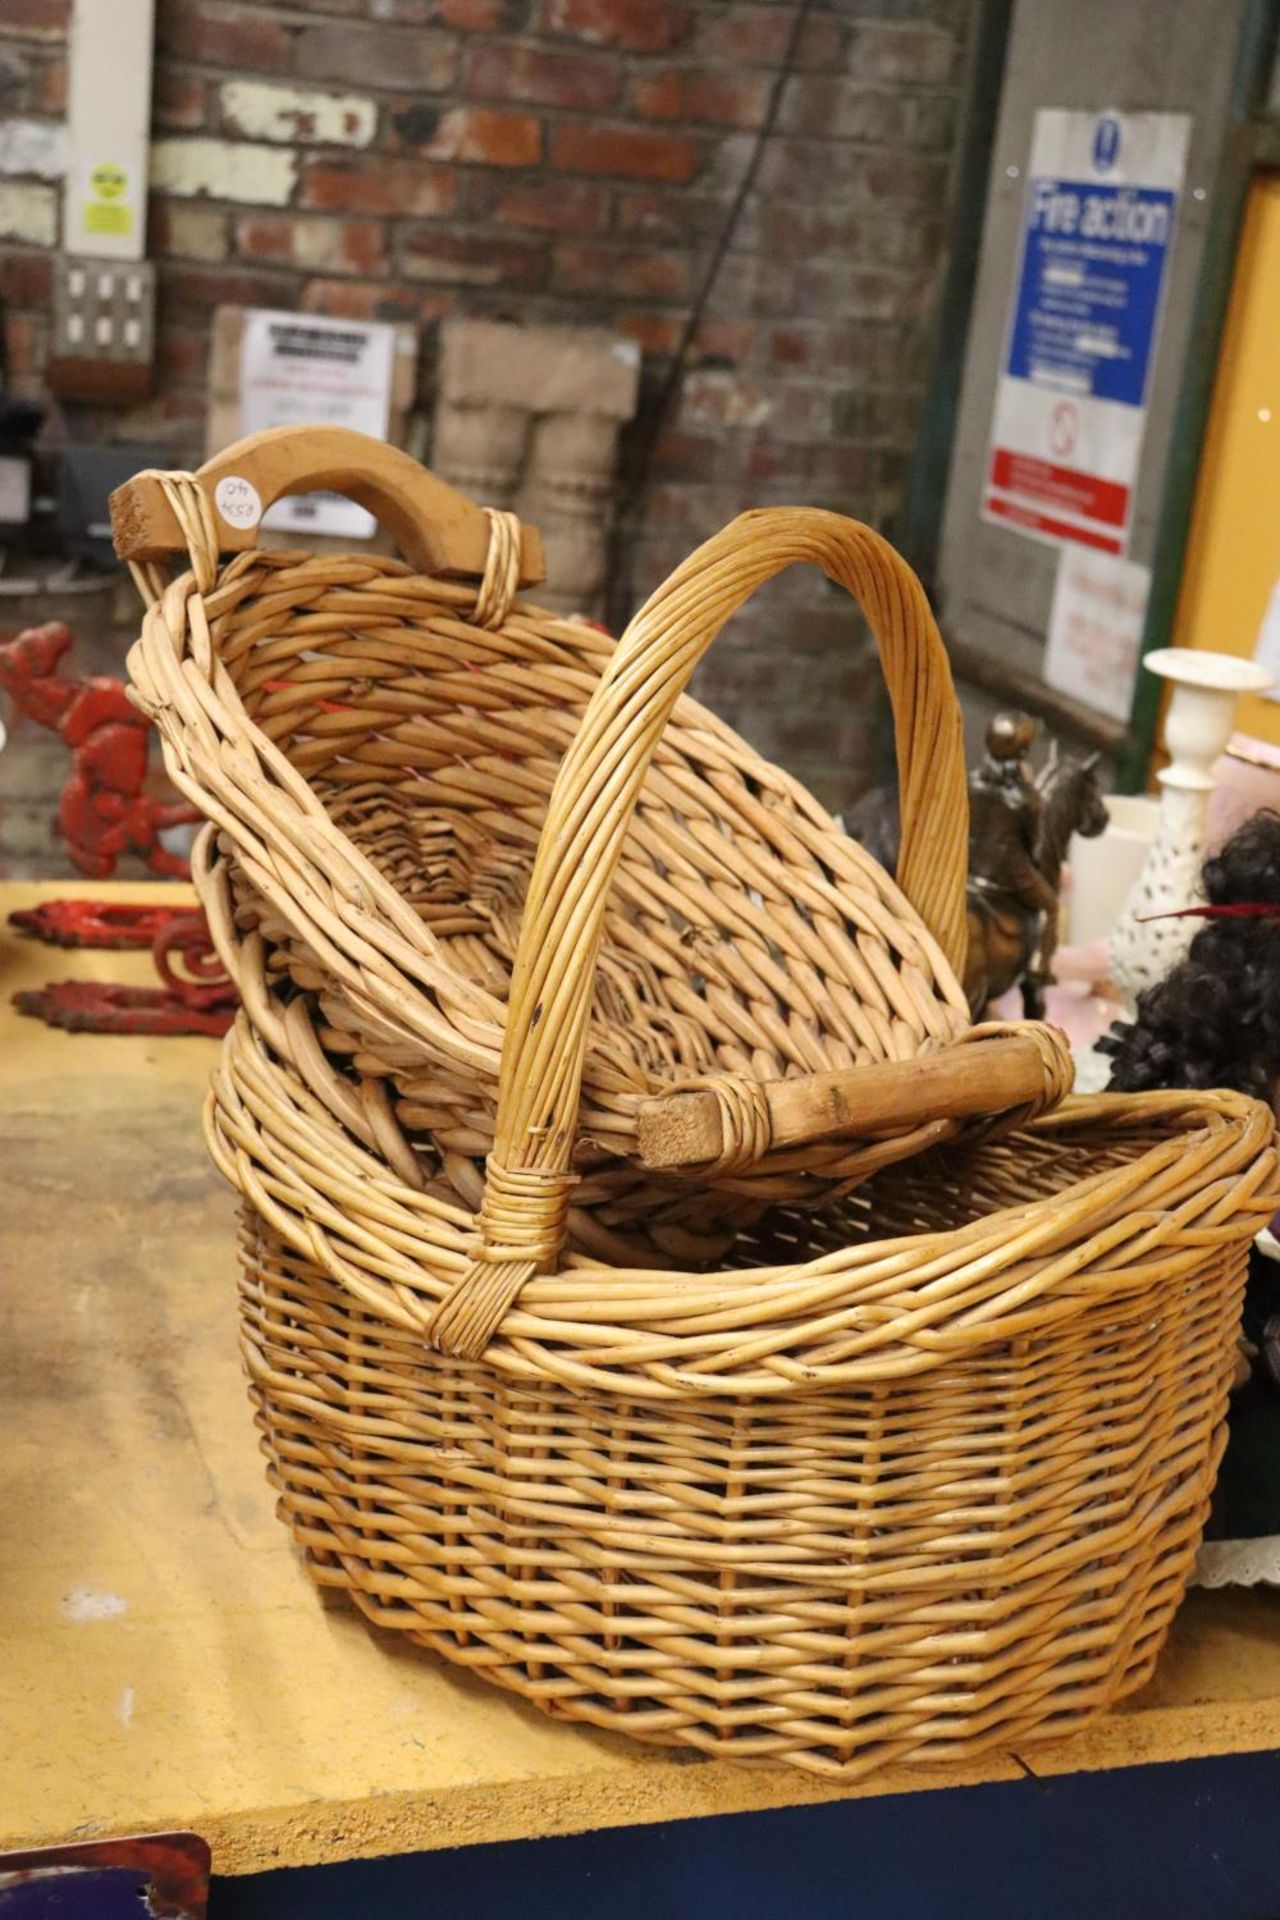 TWO VINTAGE WOODEN BASKETS - Image 3 of 4